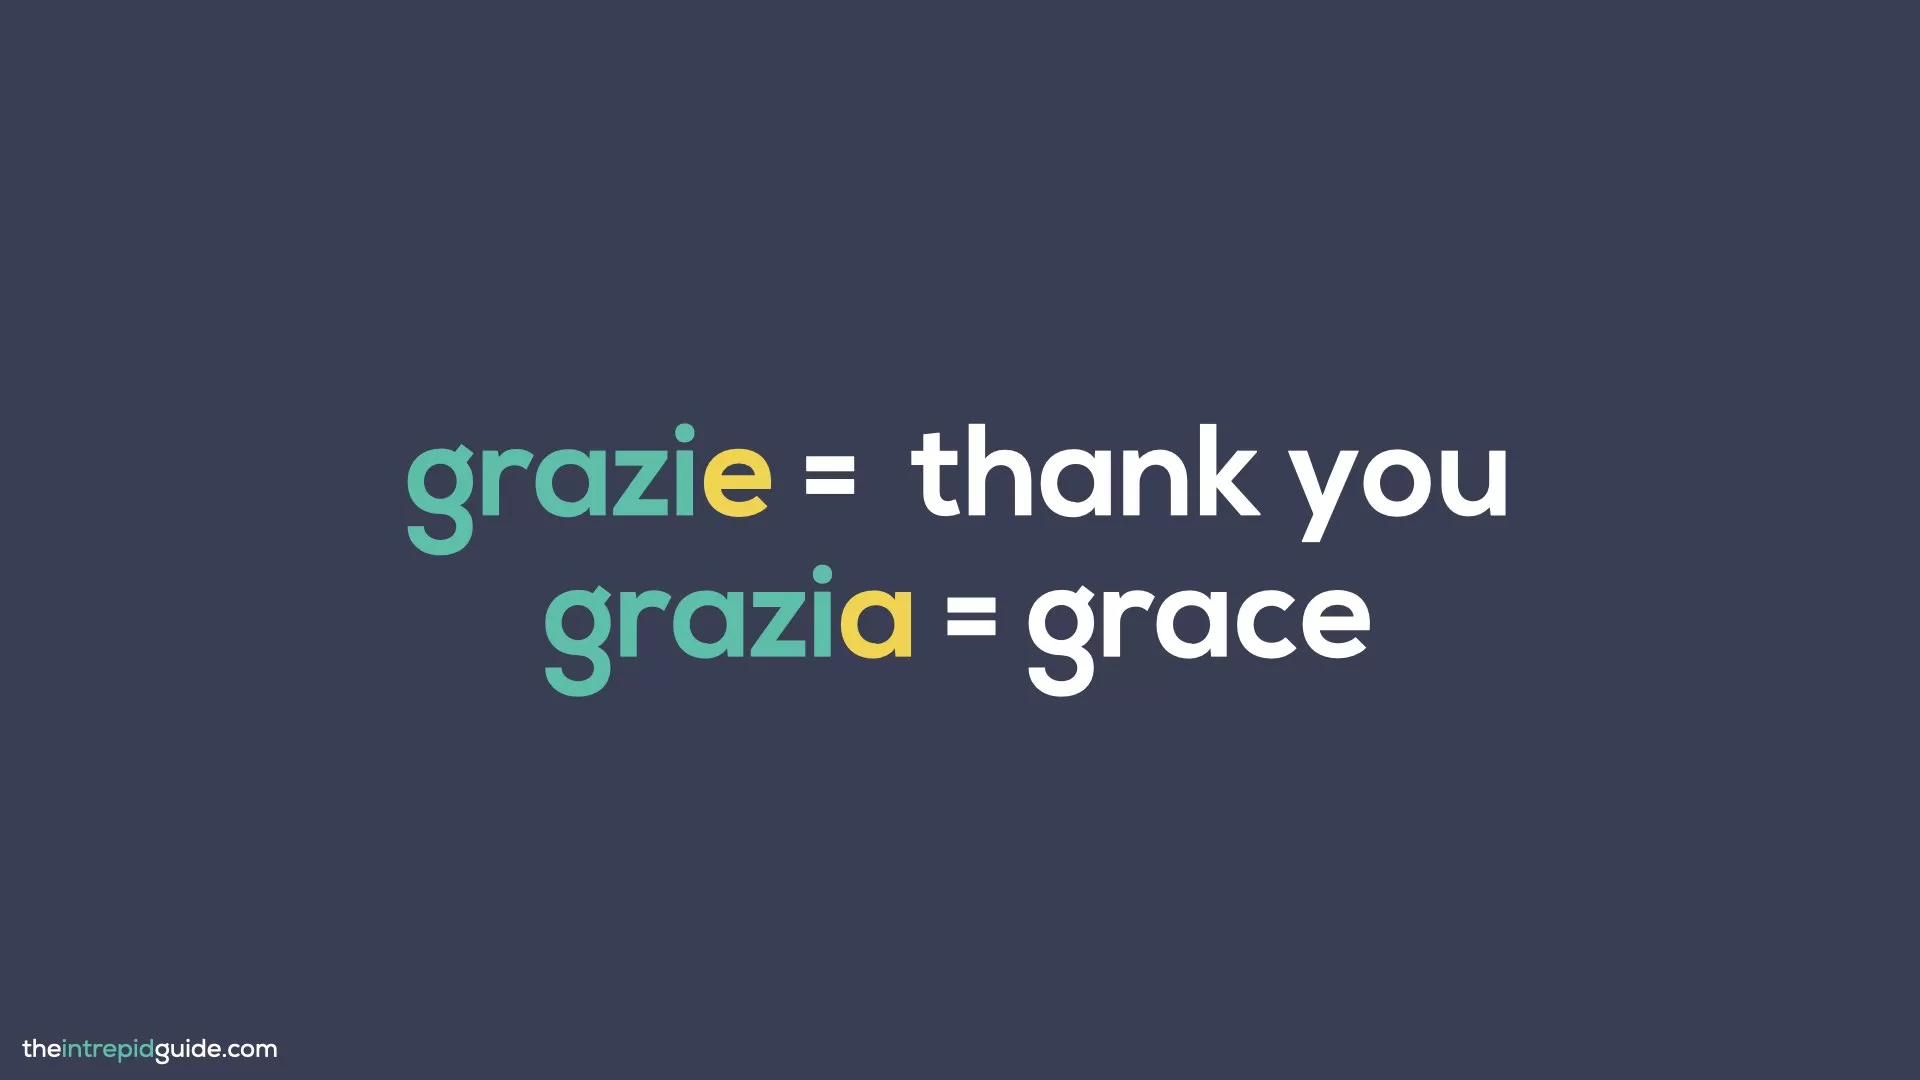 How to say Please in Italian - grazie is not the same as grazia